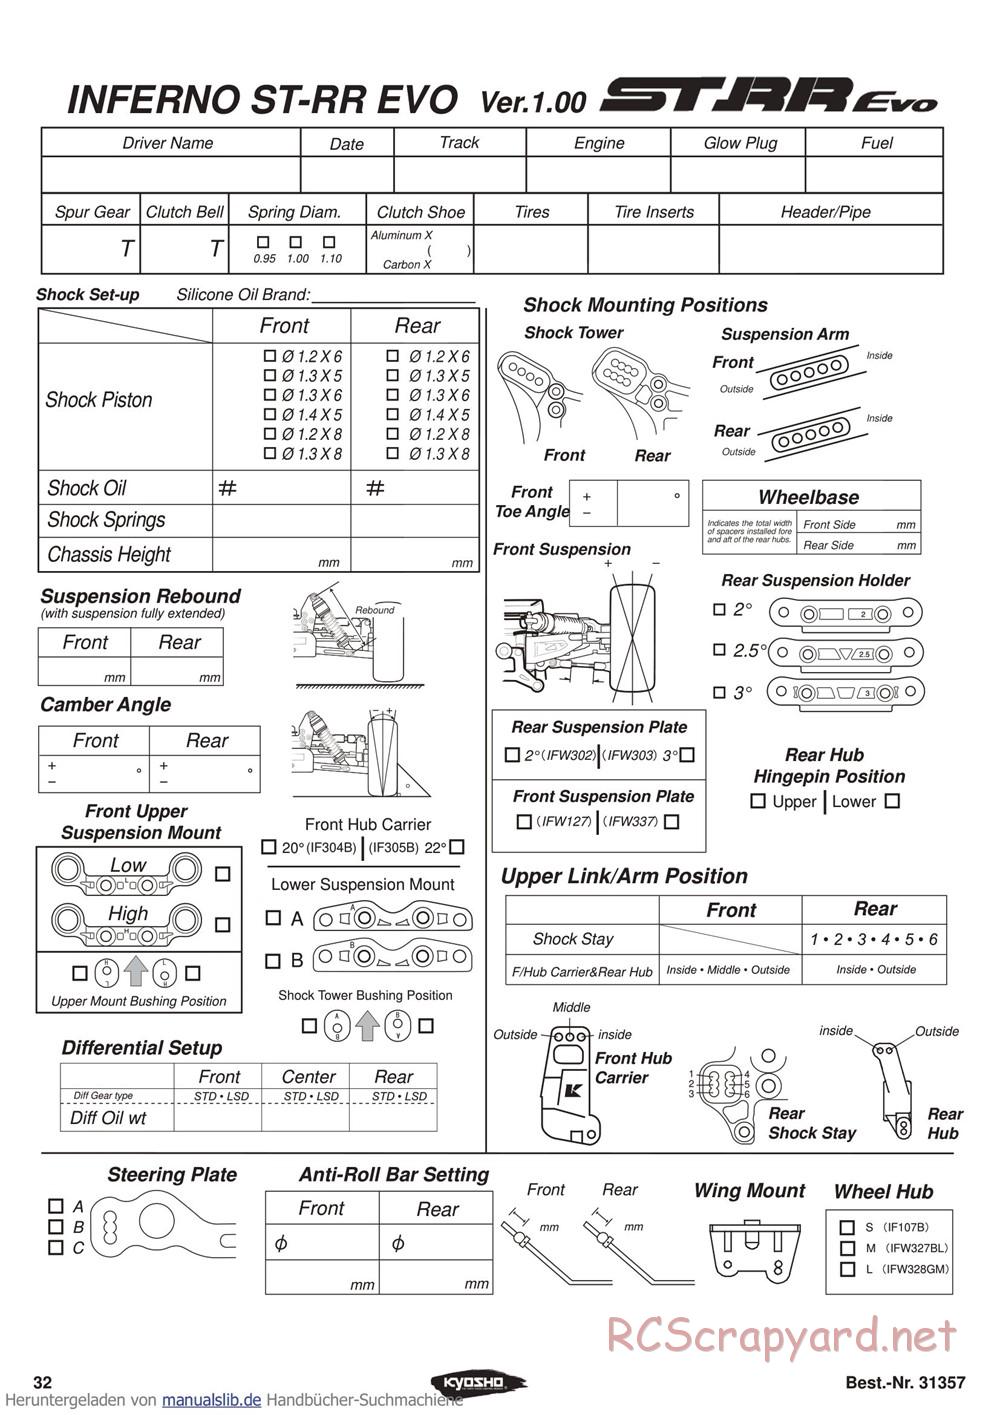 Kyosho - Inferno ST-RR Evo - Manual - Page 32